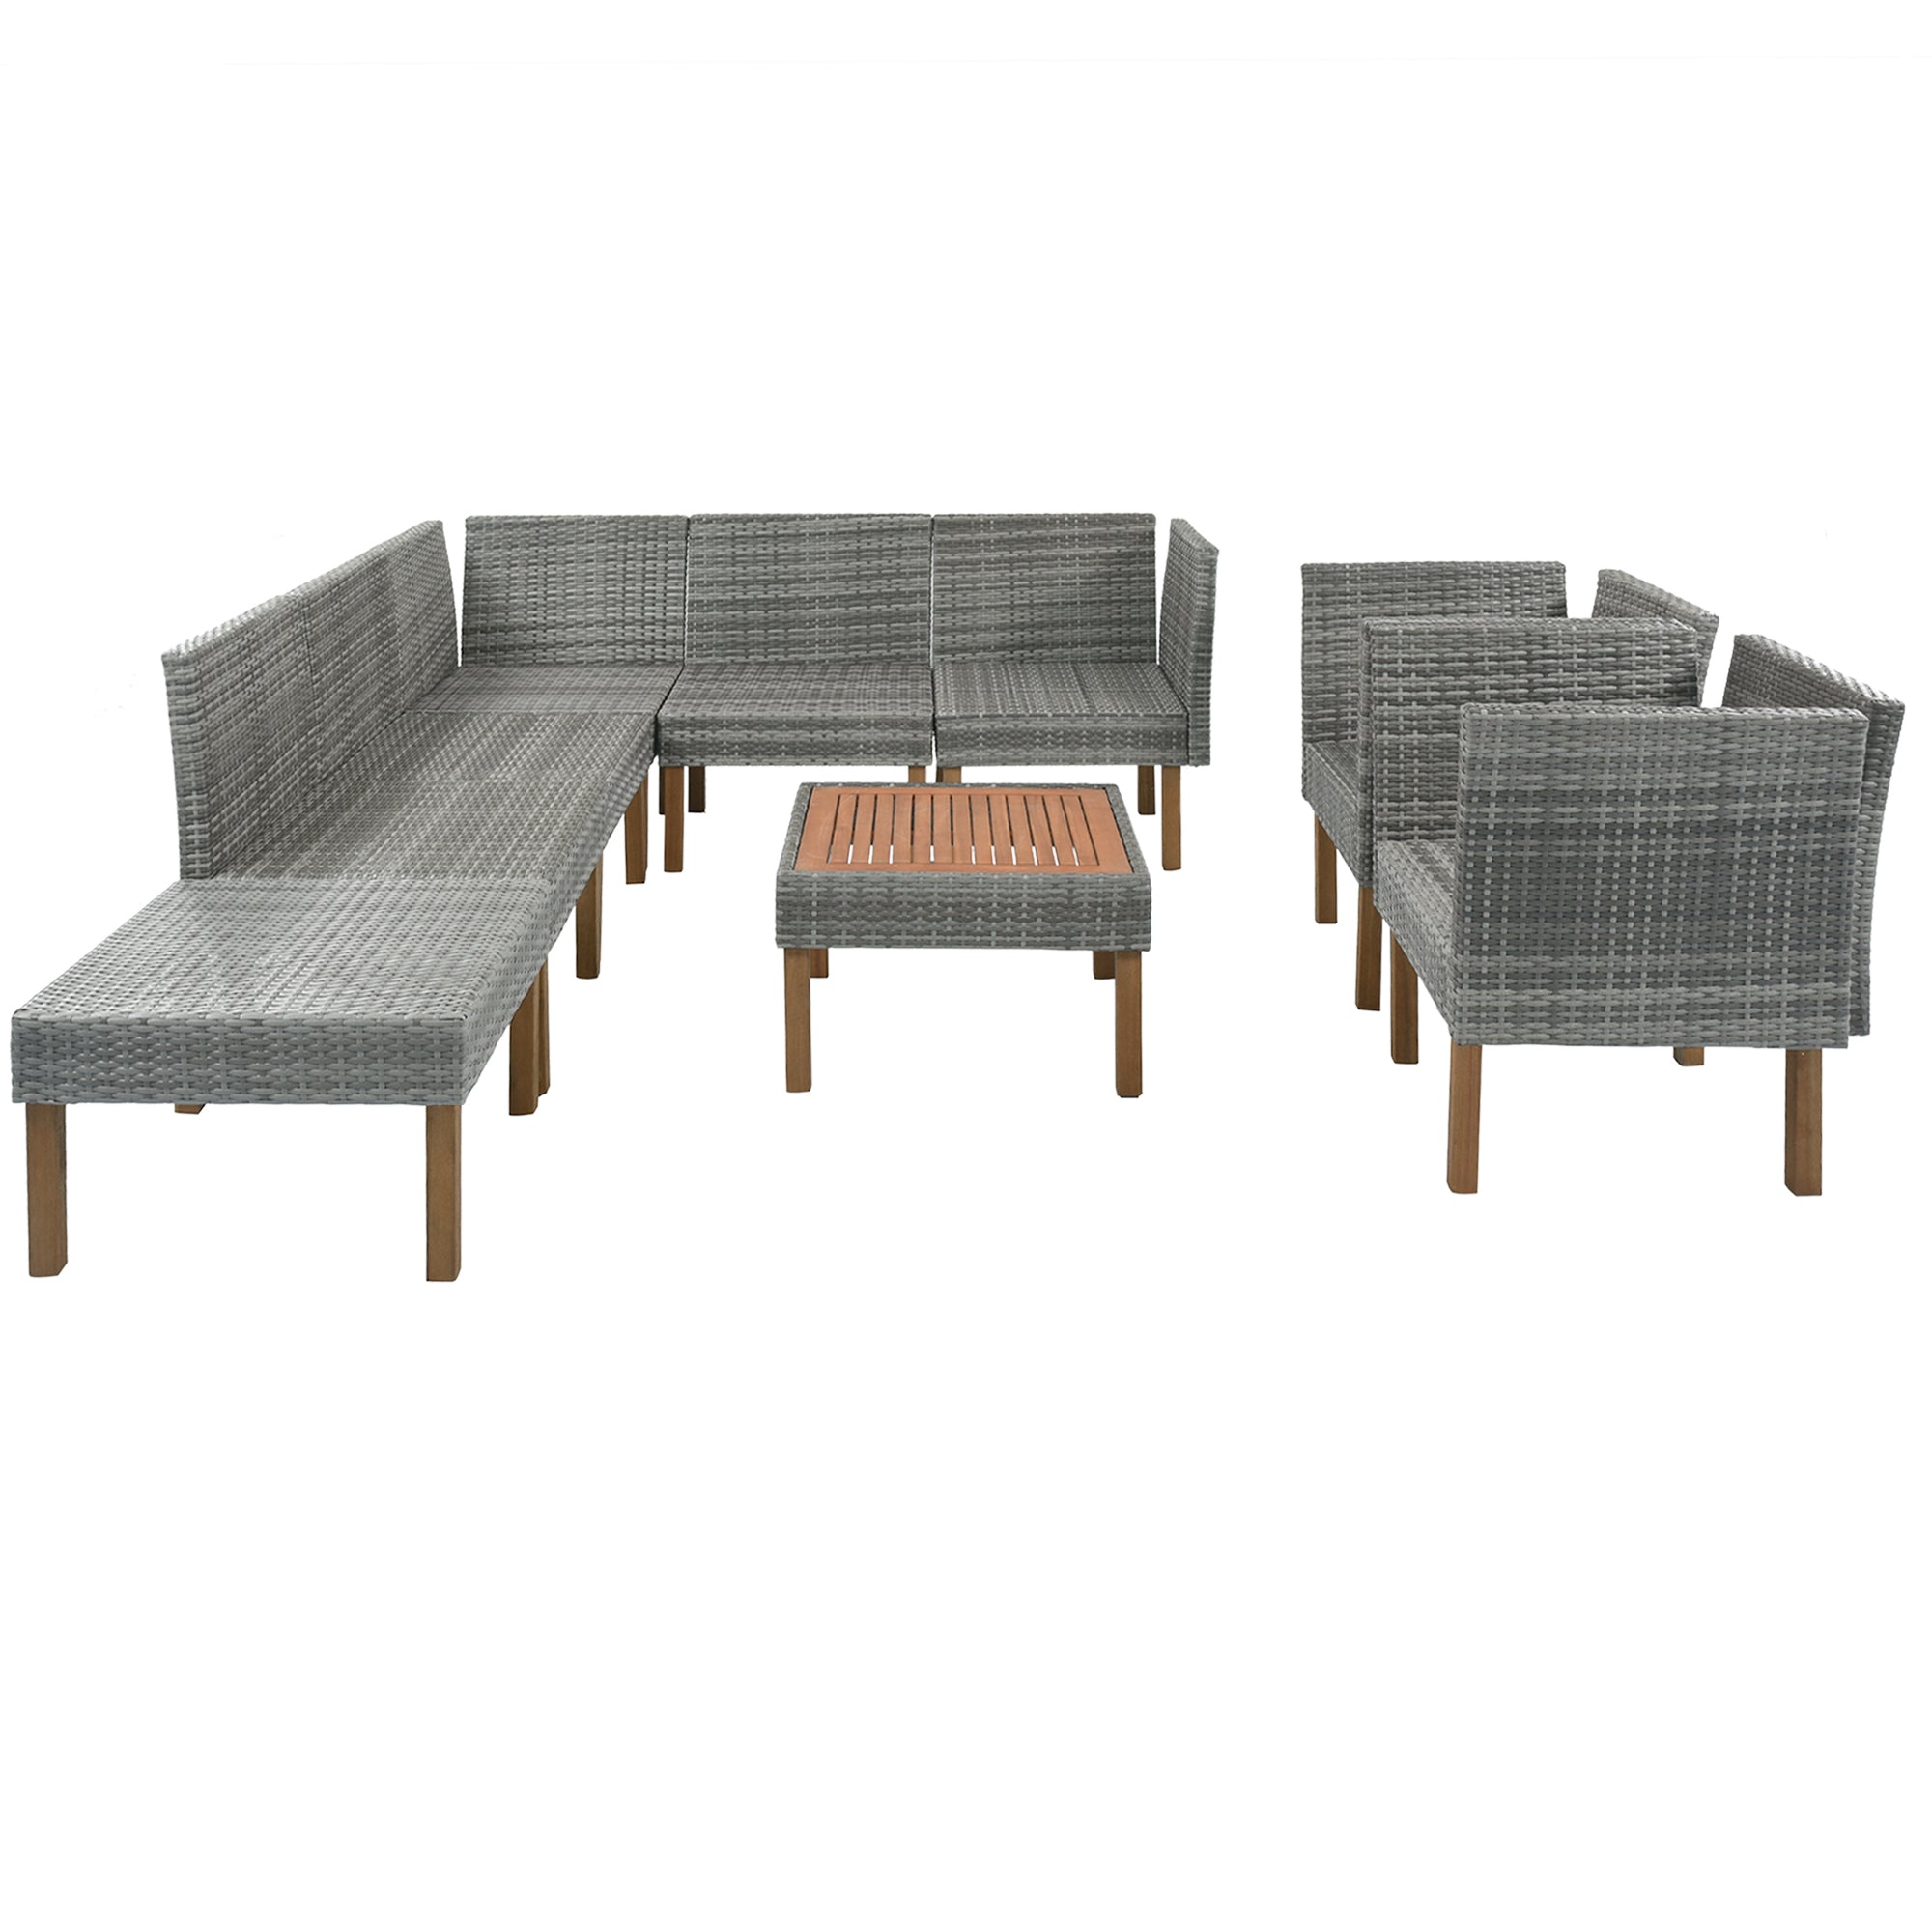 9-Piece Outdoor Gray PE Rattan Sofa Set with Wood Legs, Acacia Wood Tabletop, Armrest Chairs with Gray Cushions